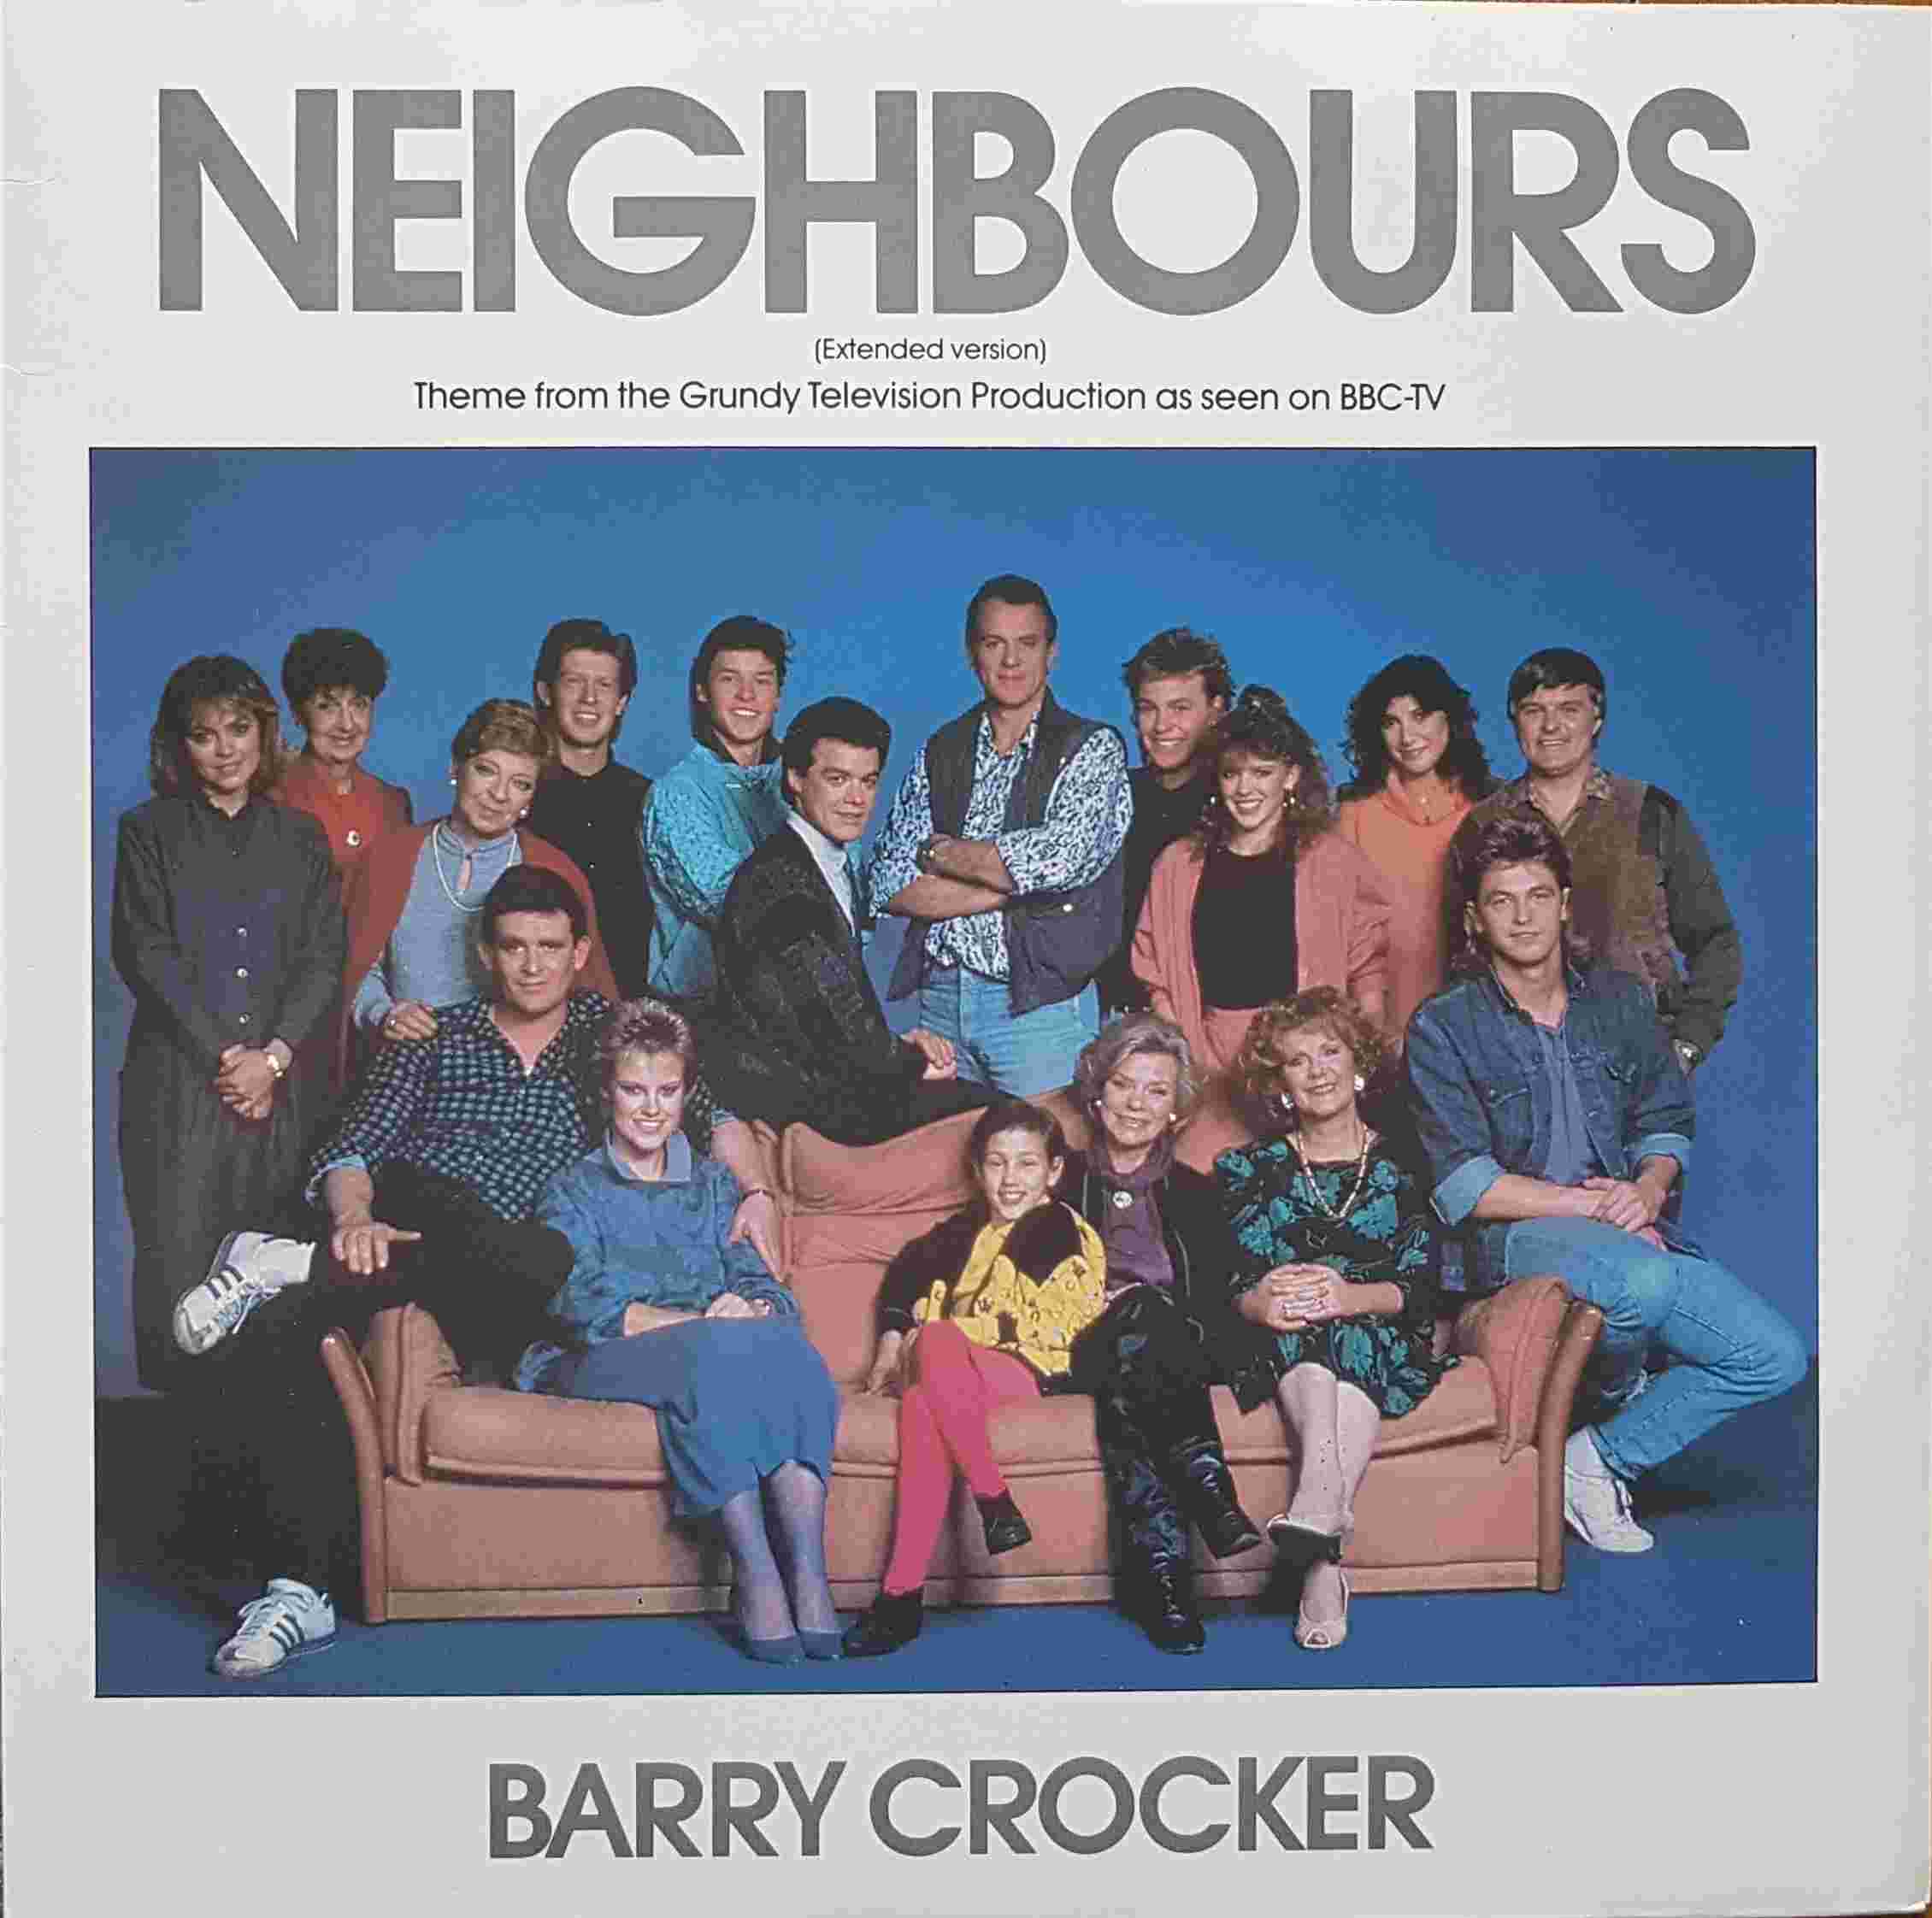 Picture of 12 RSL 210 Neighbours by artist Tony Hatch / Jackie Trent from the BBC 12inches - Records and Tapes library